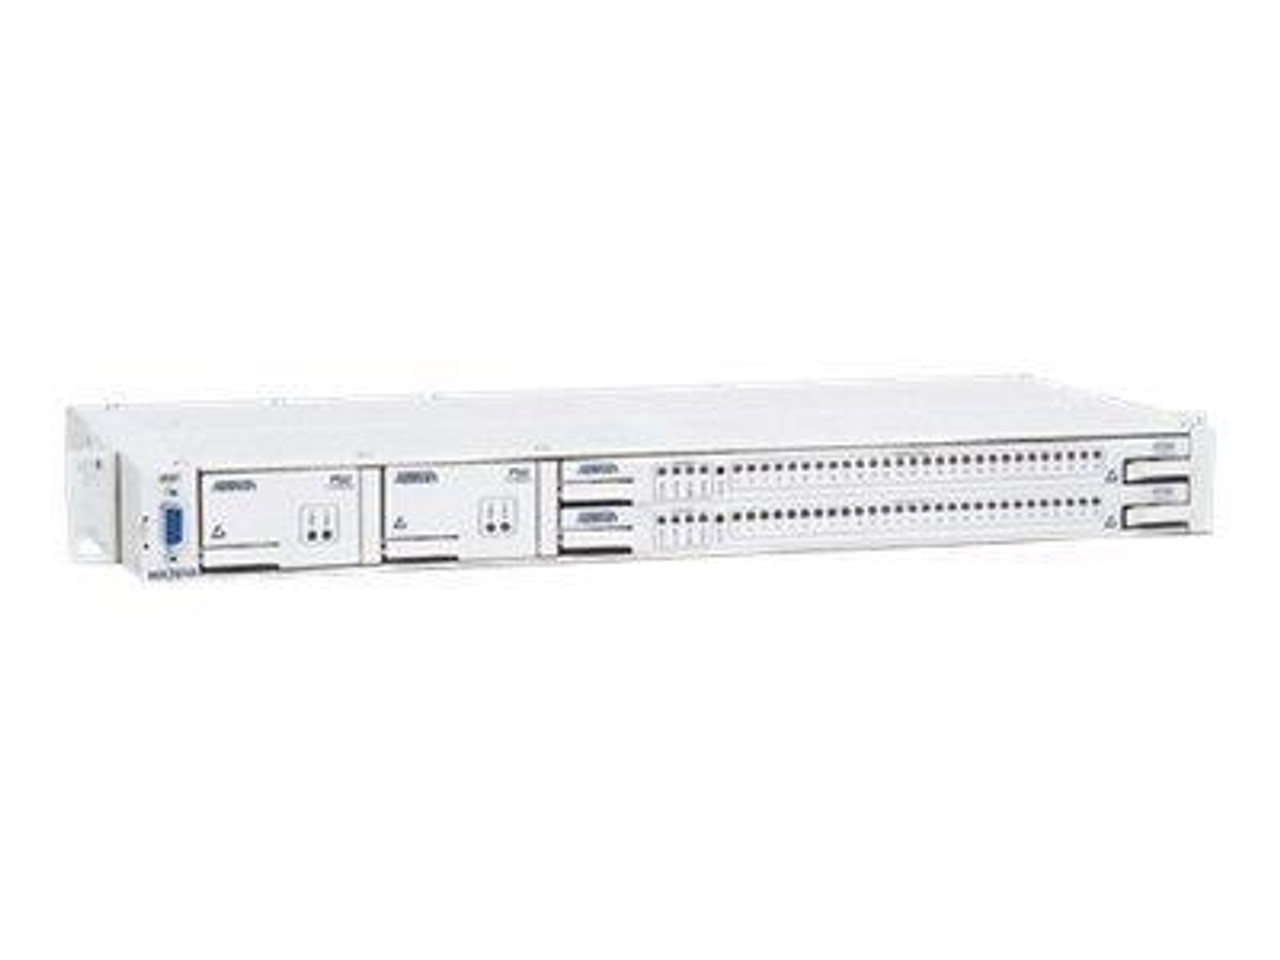 4185001L5 Adtran MX2810 Chassis with Two PSUs and Two DS3 Controllers (Refurbished)